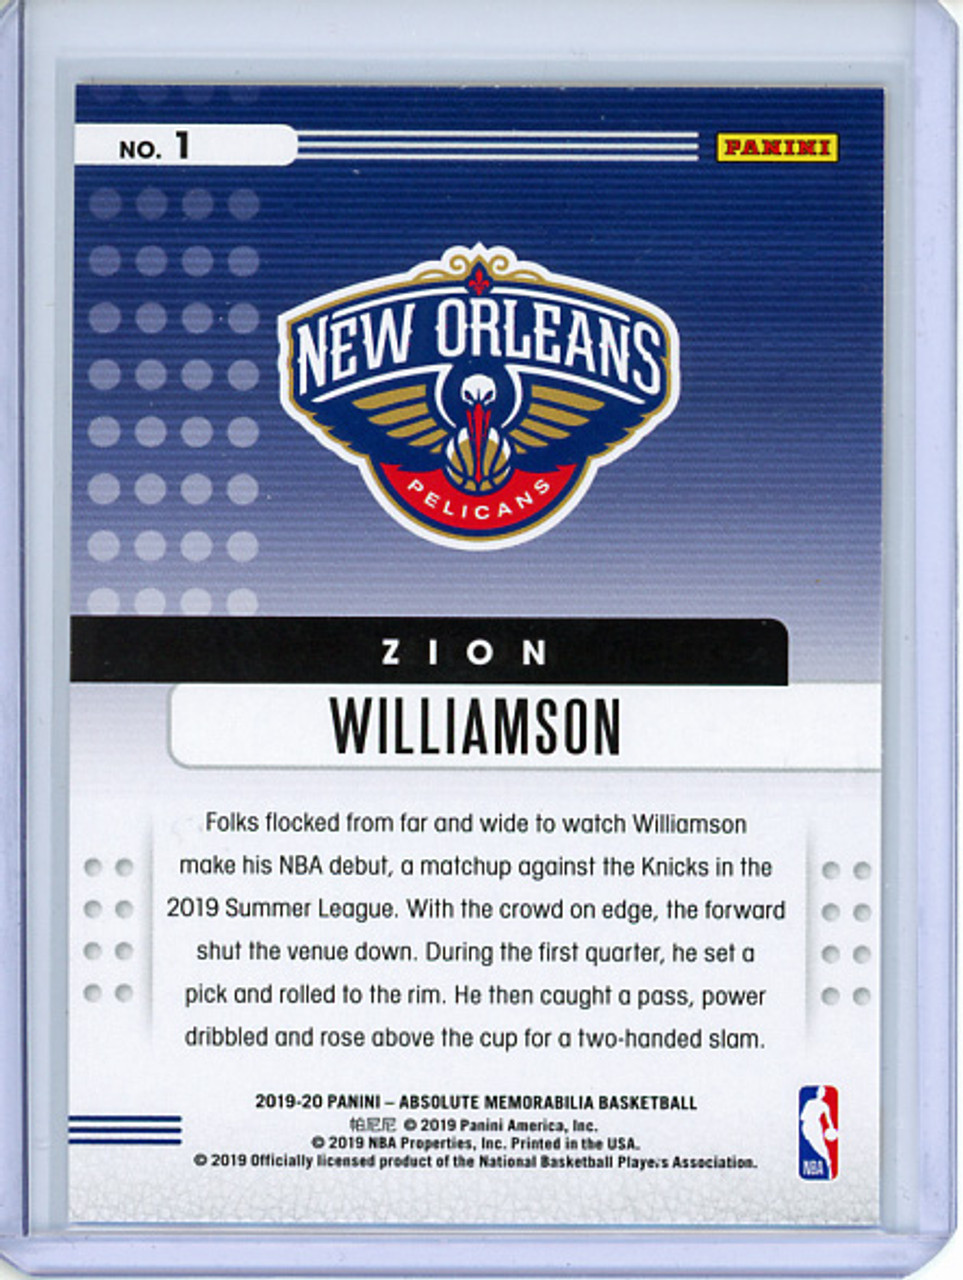 Zion Williamson 2019-20 Absolute, Rookies Yellow #1 (4)